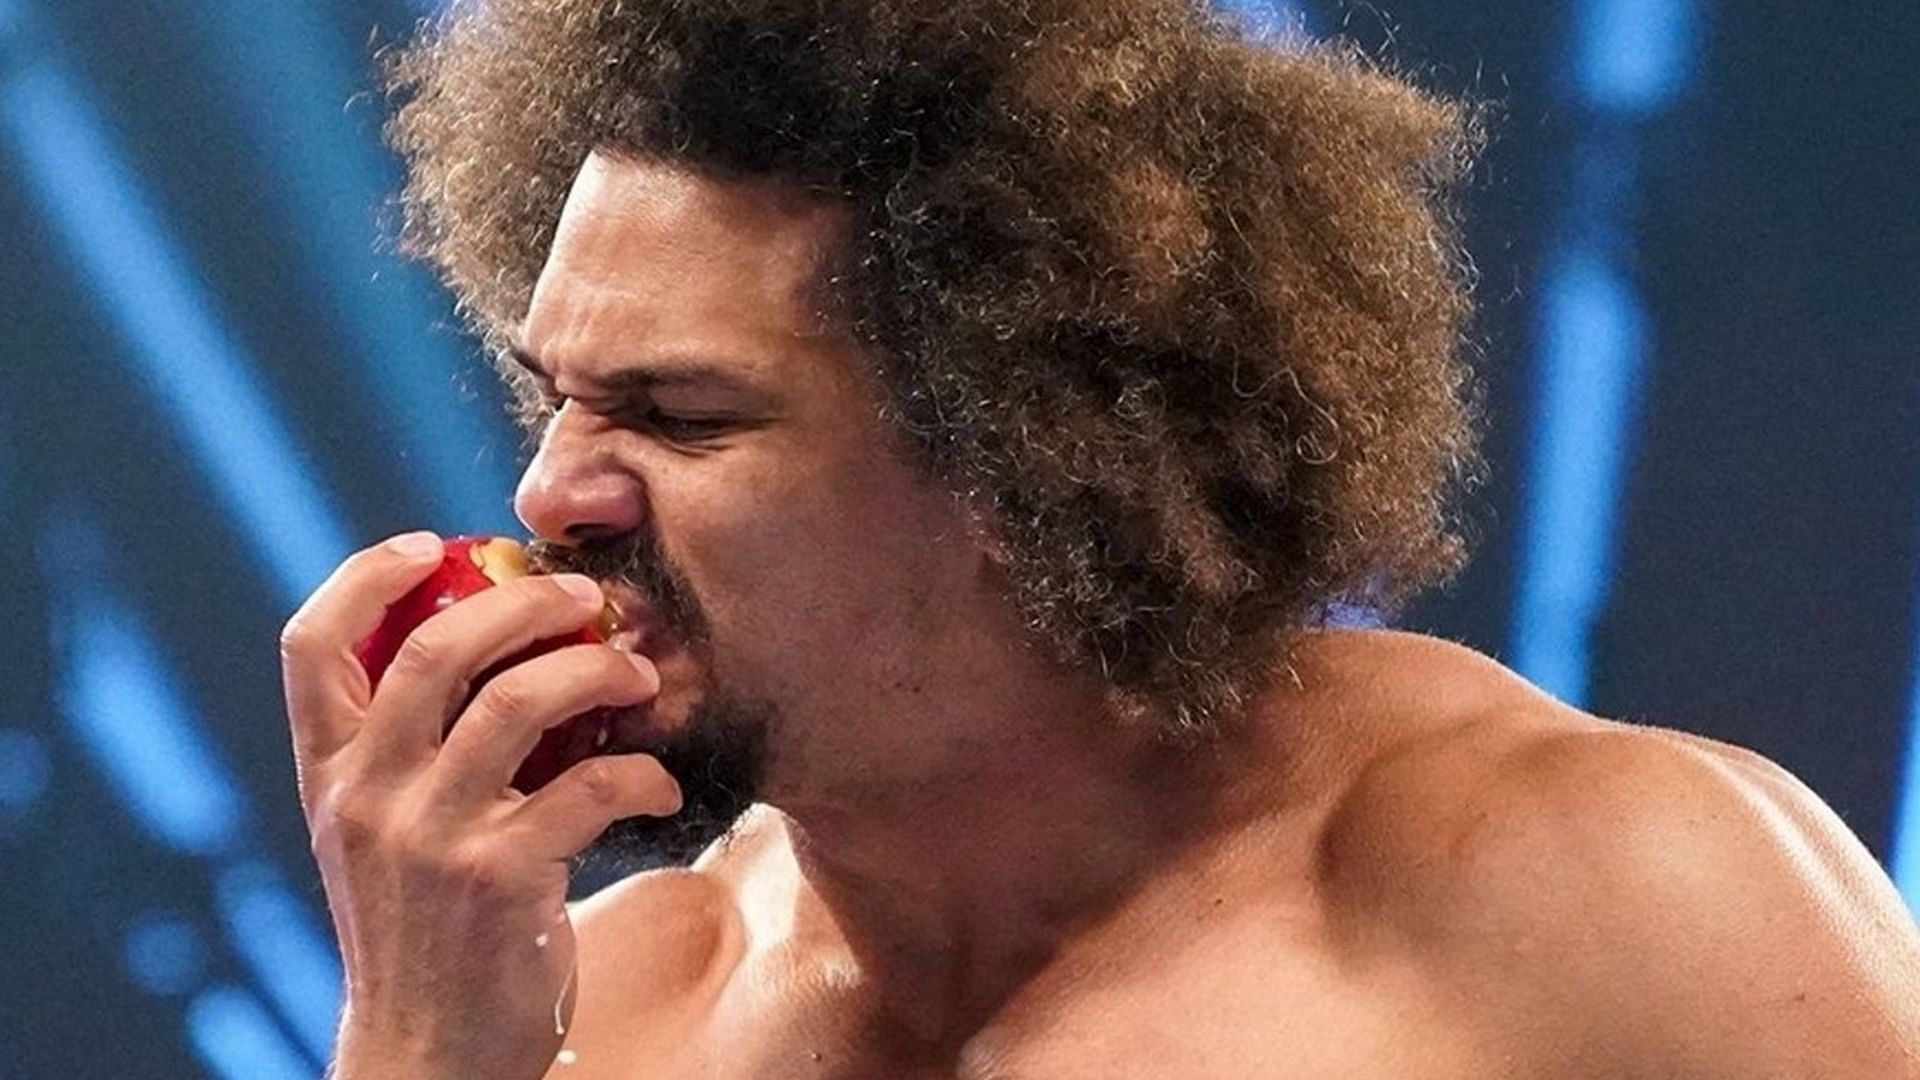 WWE Superstar Carlito is a member of Latino World Order